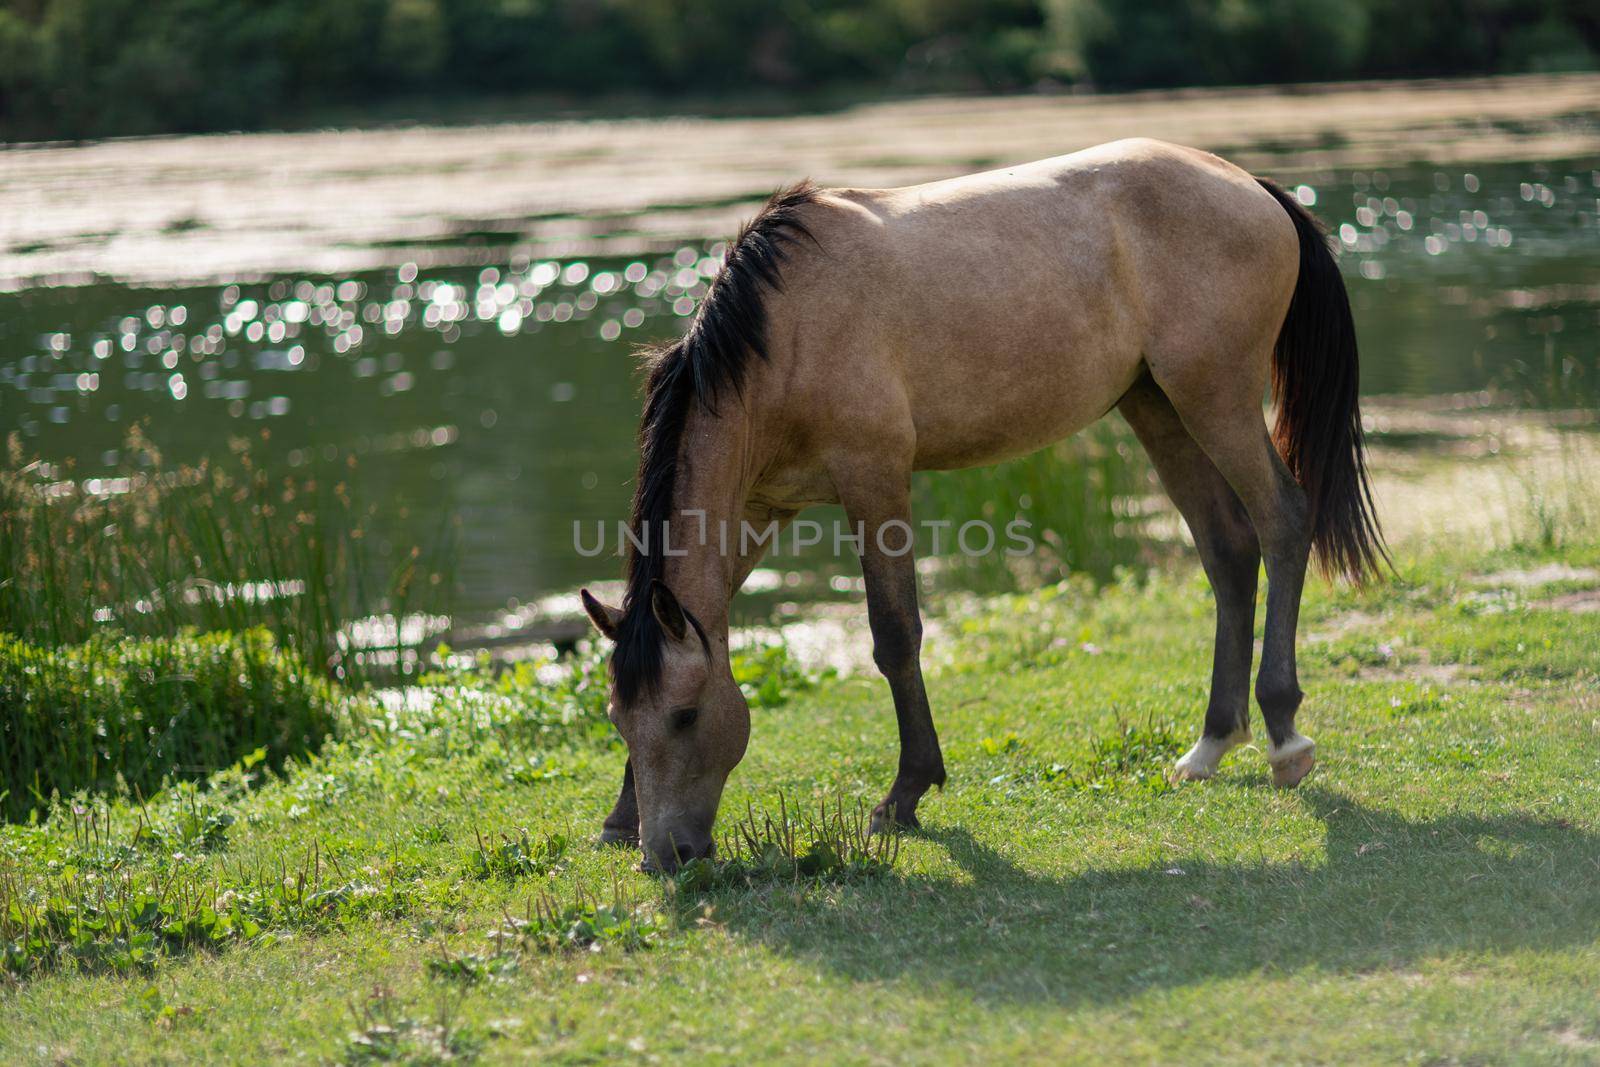 Beautiful brown wild horse standing near a pond